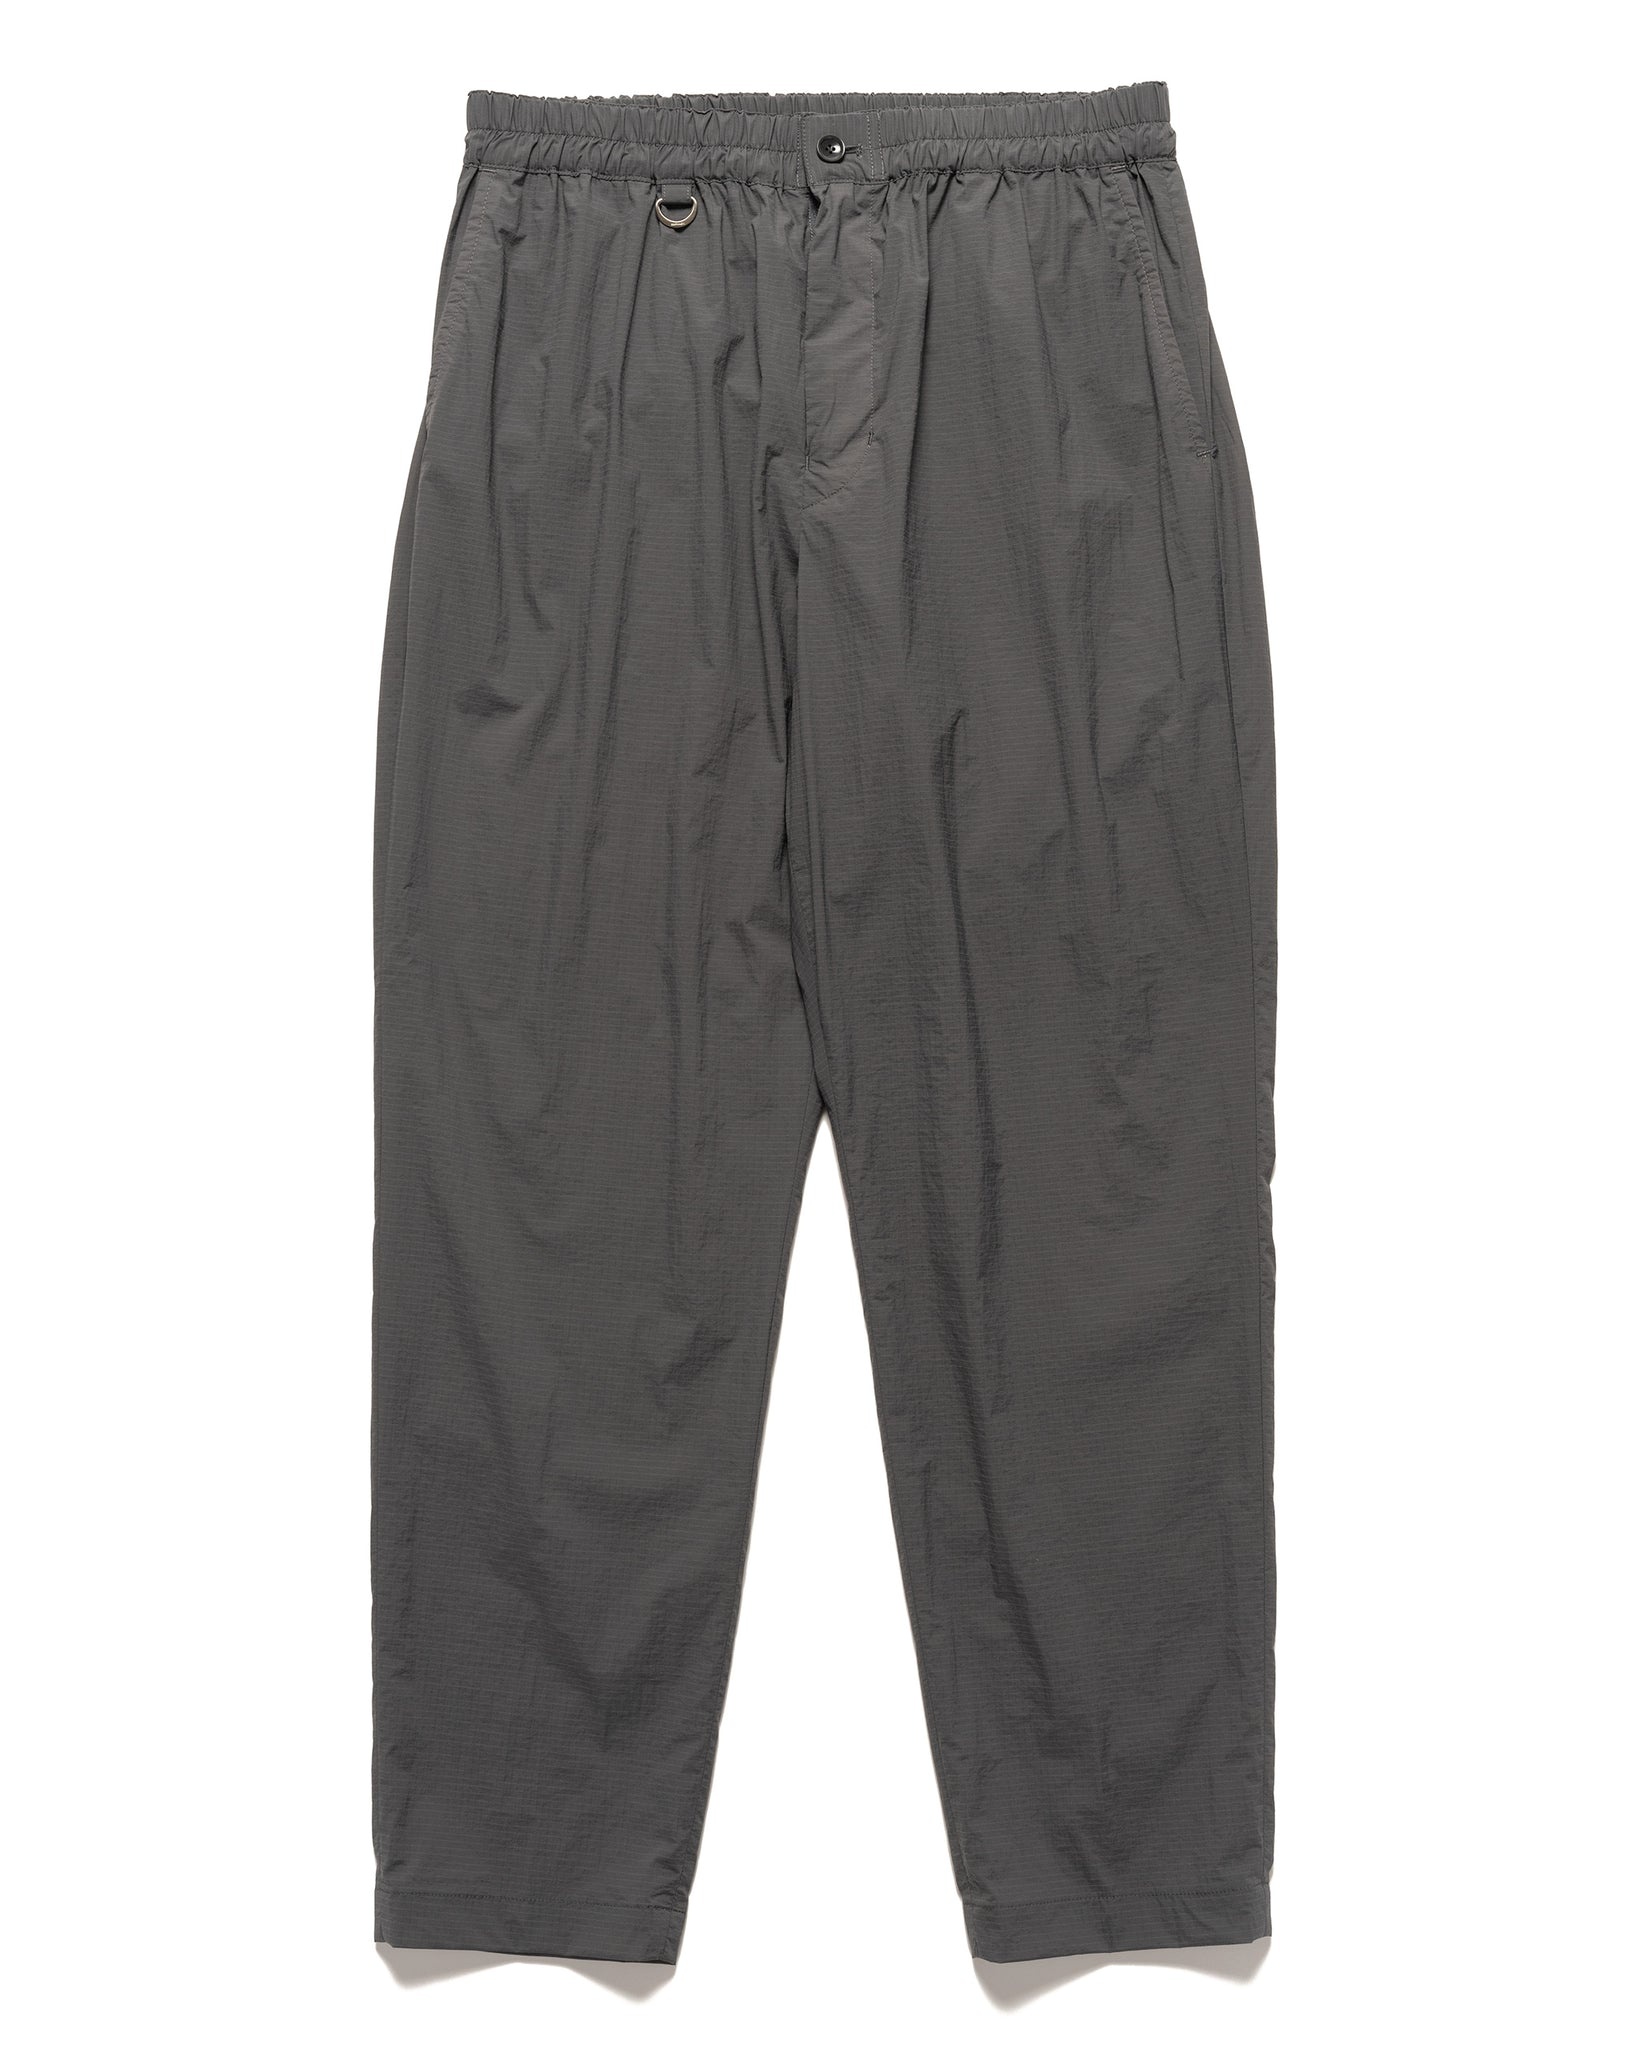 Xersion Ripstop Mens Tapered Sweatpant - JCPenney